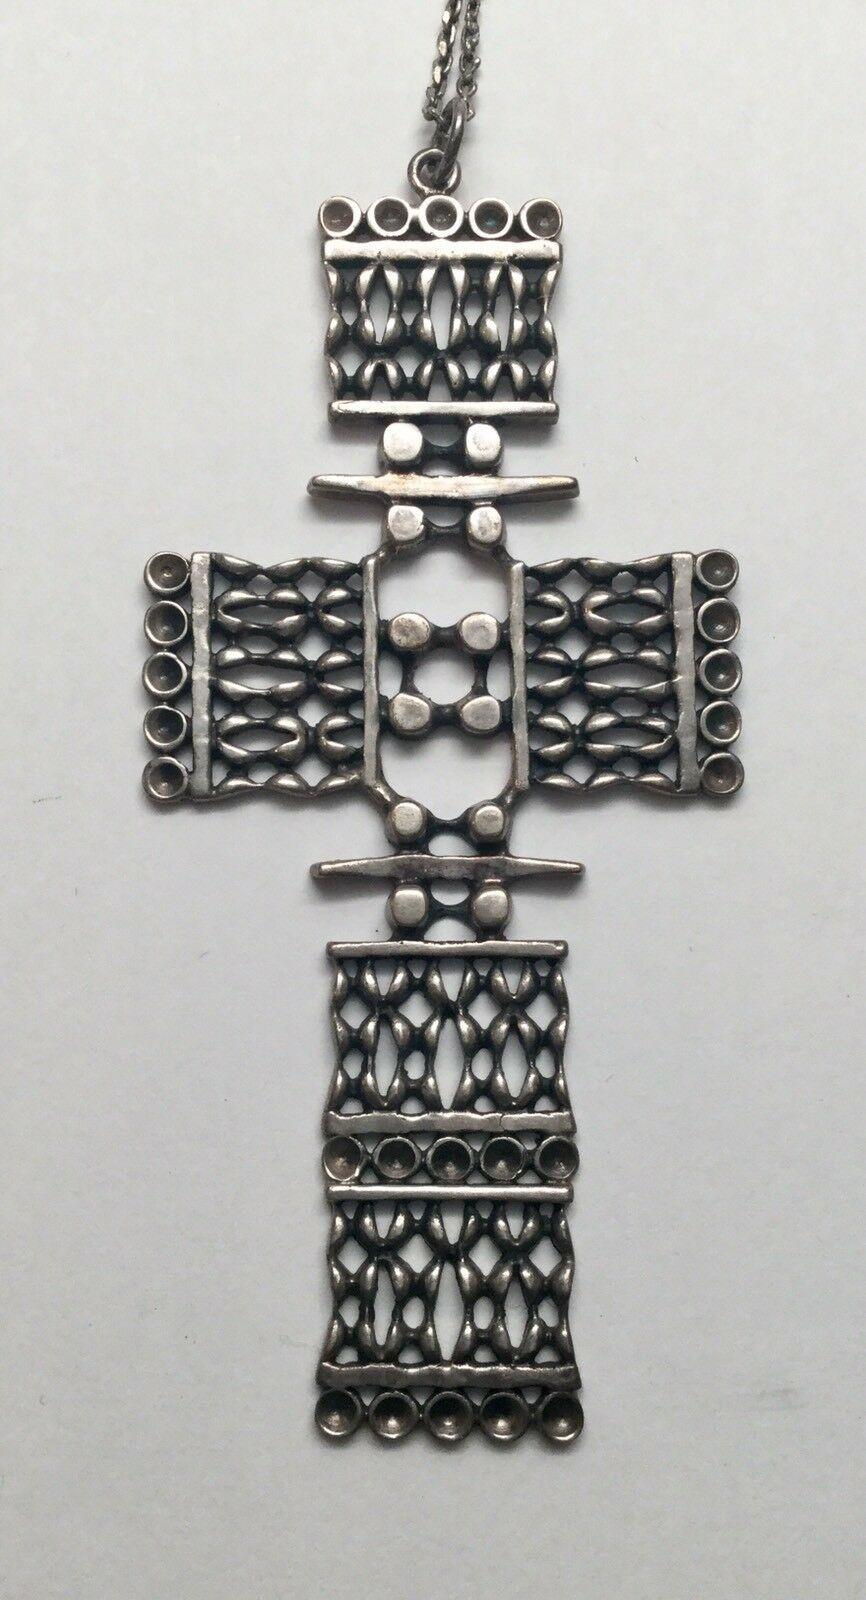 Vintage Finland 830 Silver Modernist Open Cut Cross Pendant Necklace.

Marked: 830S FINLAND

Measures: 3 1/2